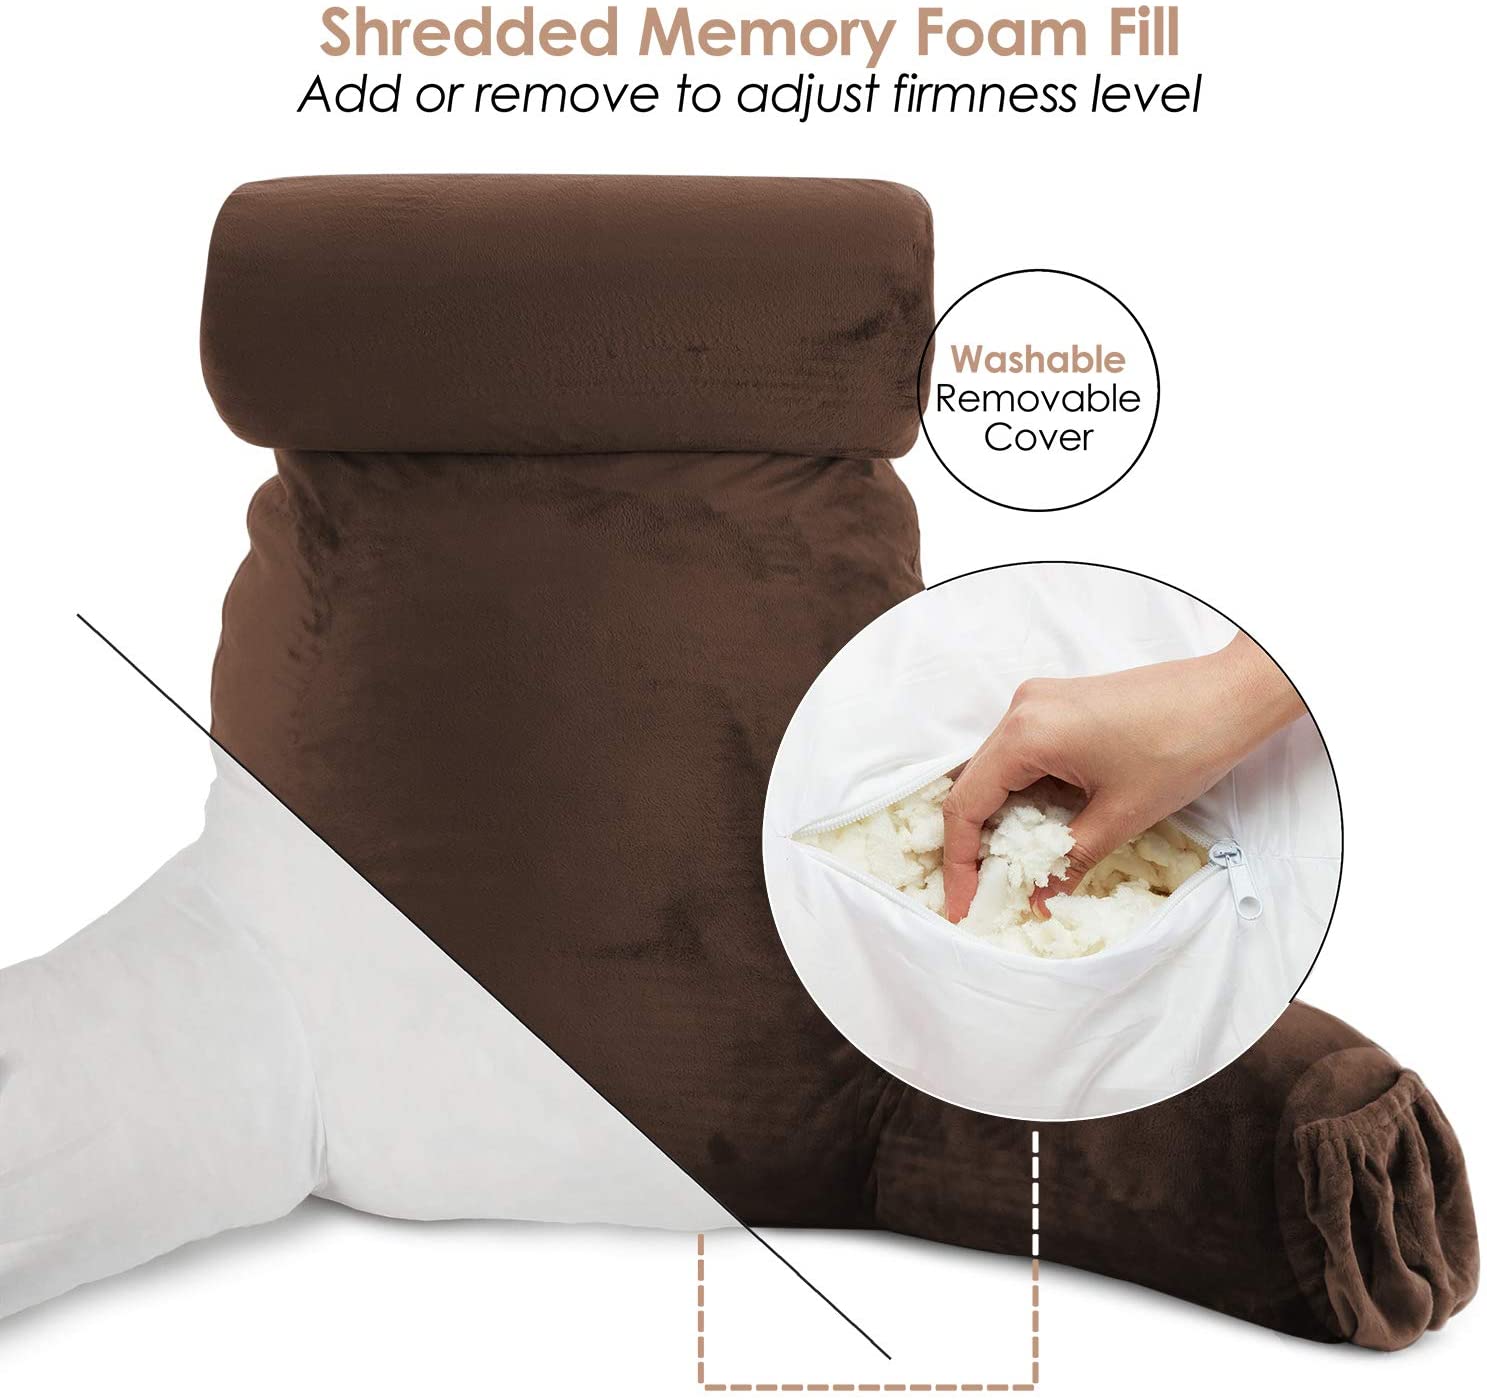 Nestl Reading Pillow, Extra Large Bed Rest Pillow with Arms – Premium Shredded Memory Foam TV Pillow, Detachable Neck Roll & Lumbar Support Pillow - Brown Chocolate